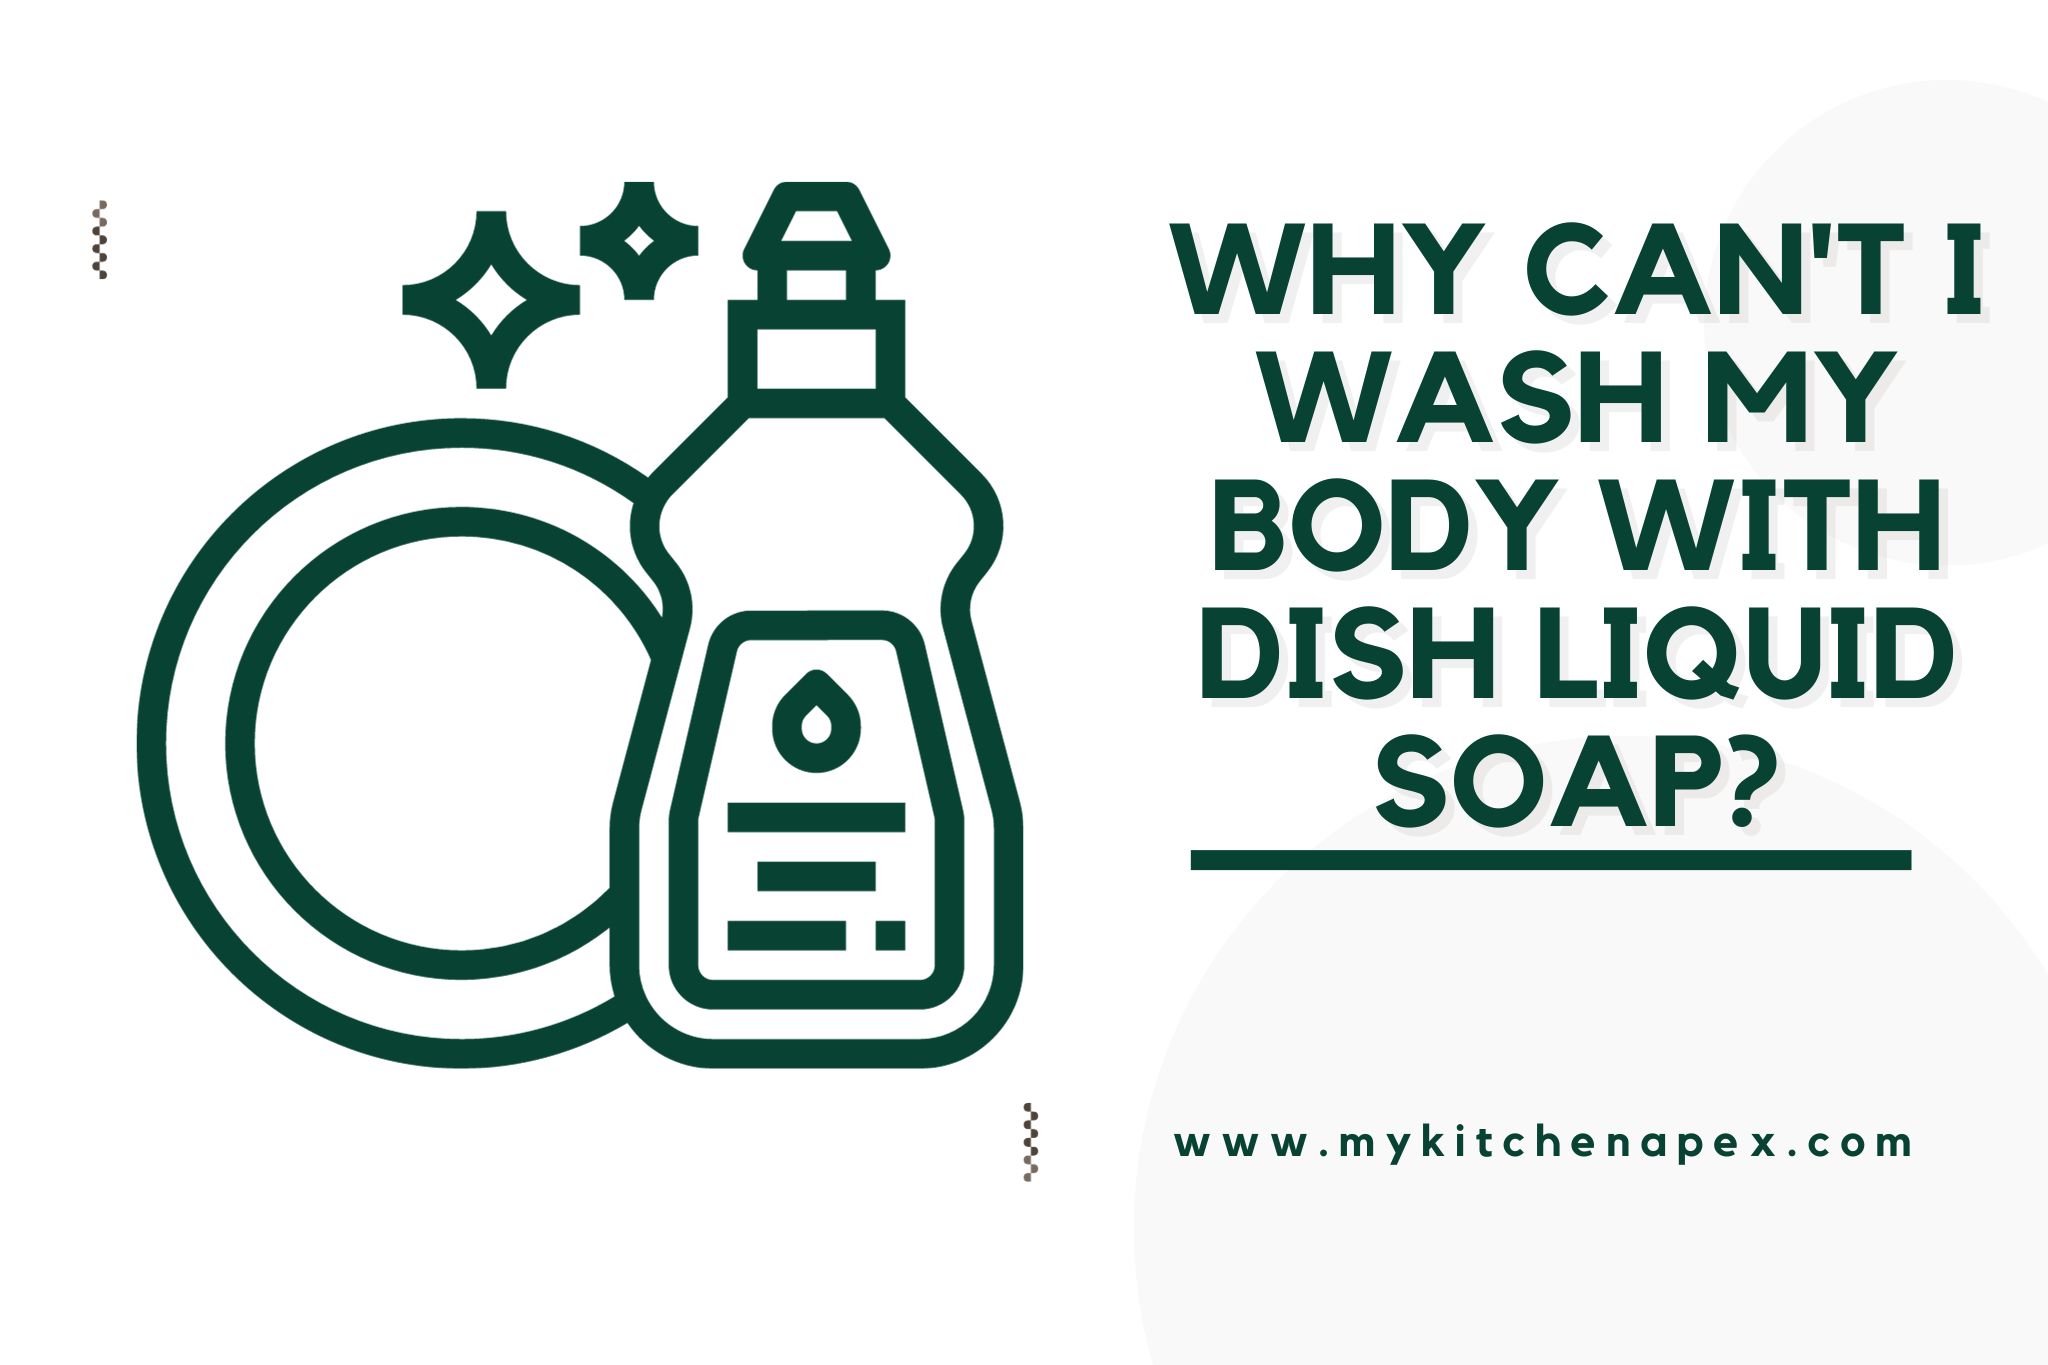 Why can't I wash my body with dish liquid soap?